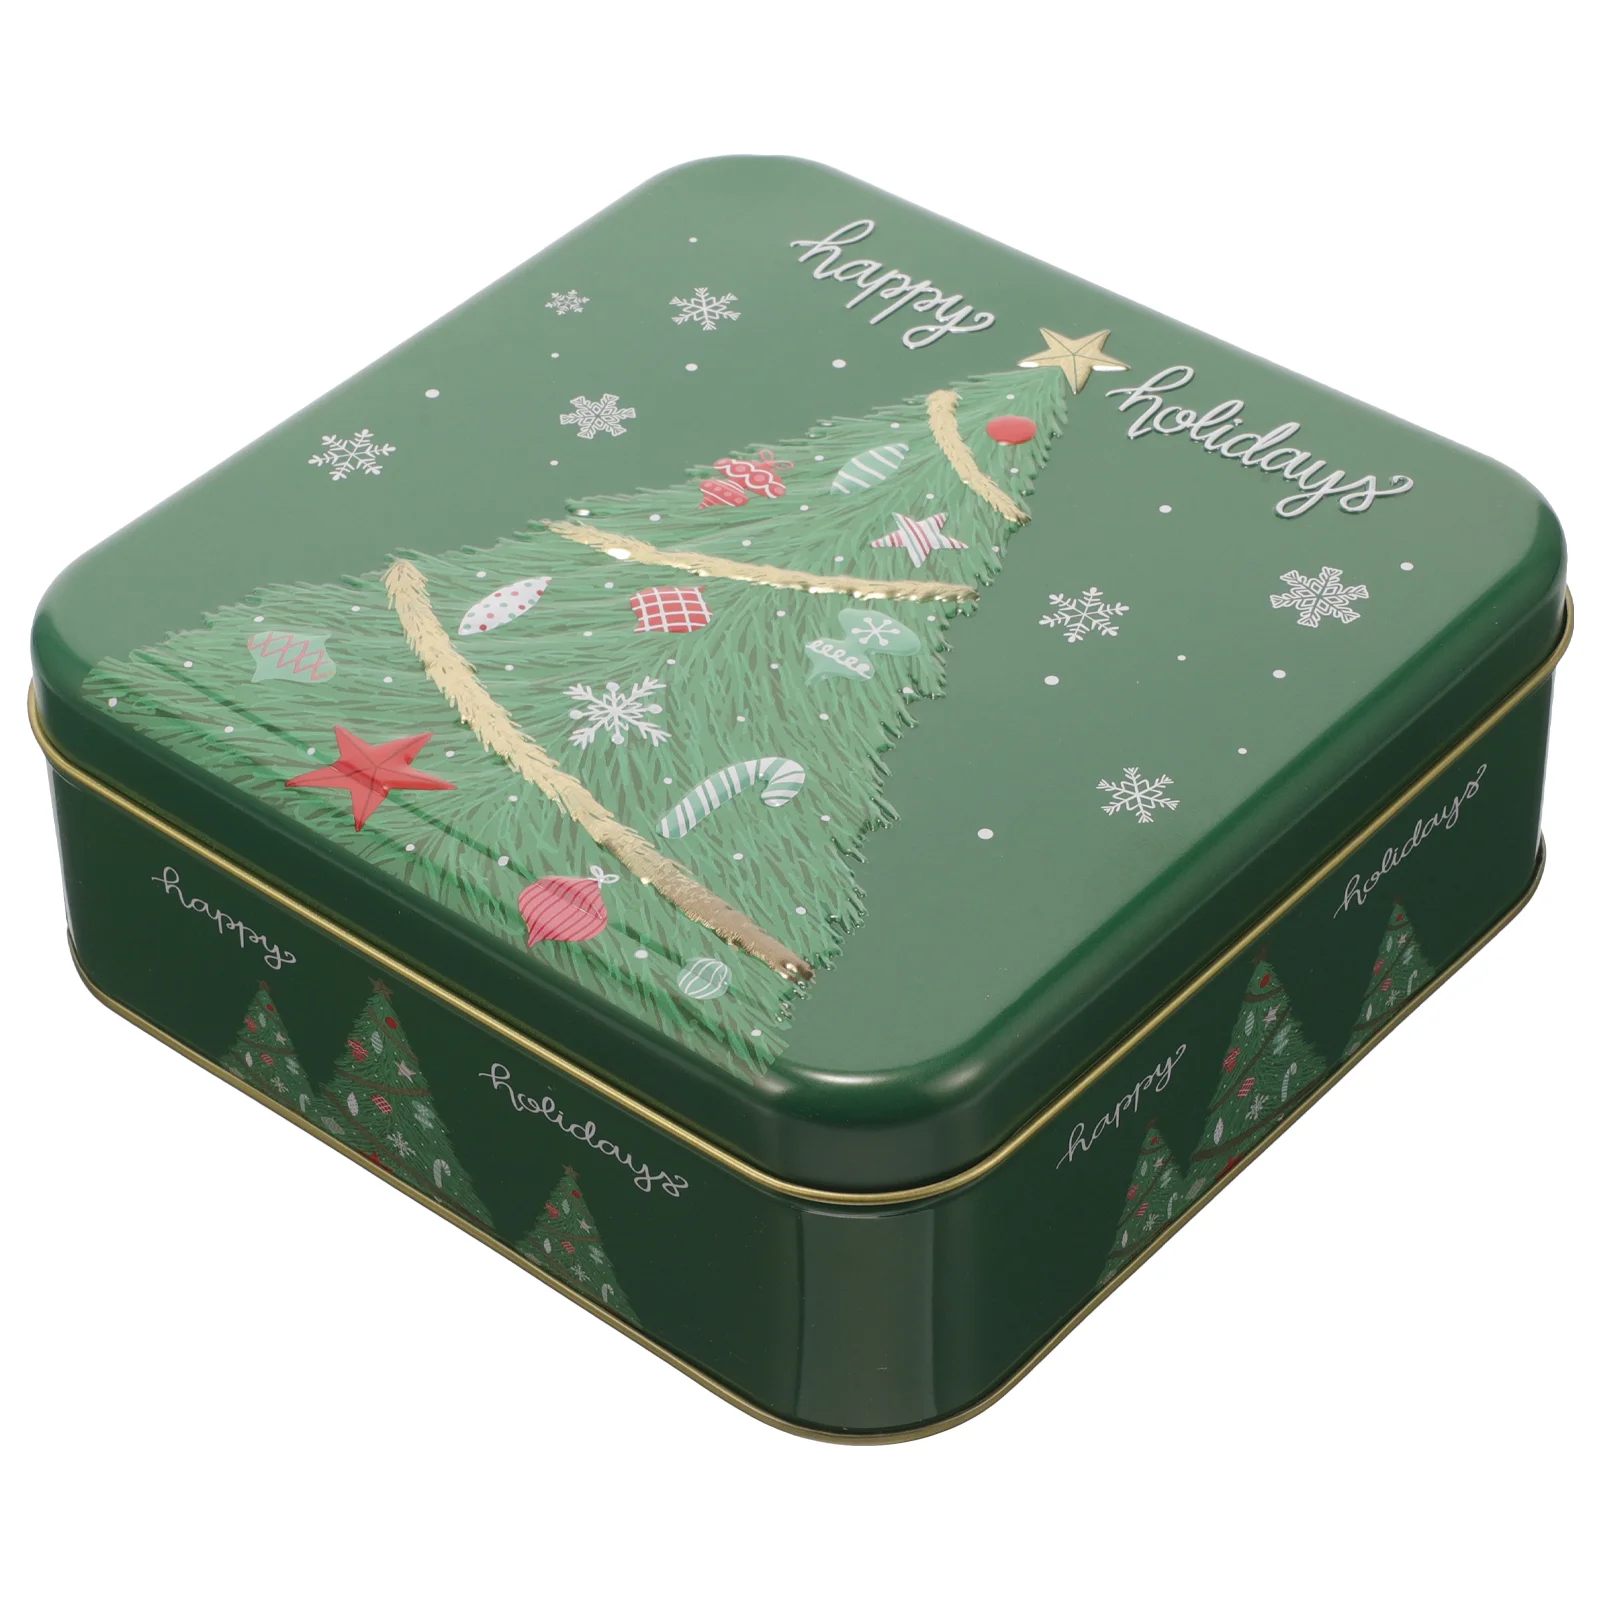 

Christmas Gift Box Chocolate Gifts Cookie Containers Storage Biscuit Party Tins Lids Giving Tinplate Large